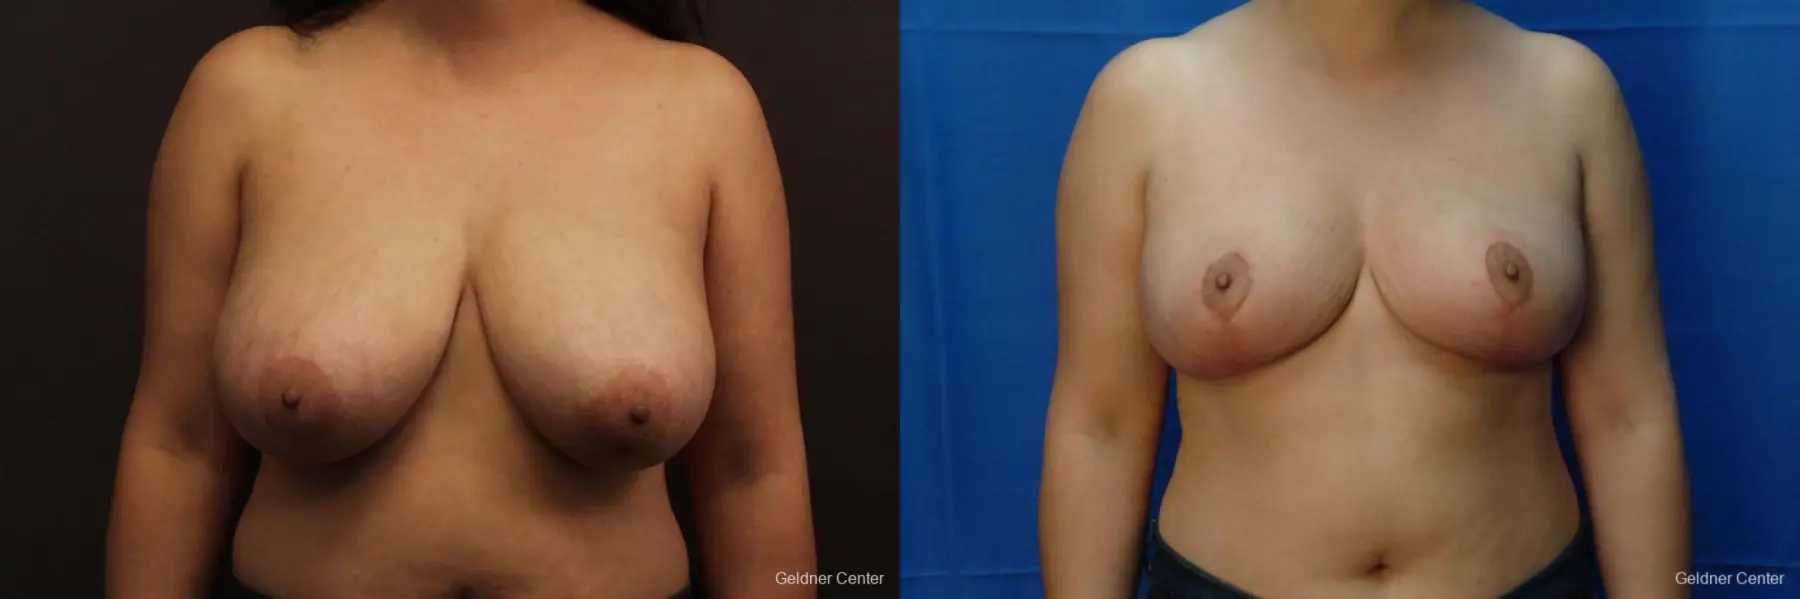 Chicago Breast Reduction 2416 - Before and After